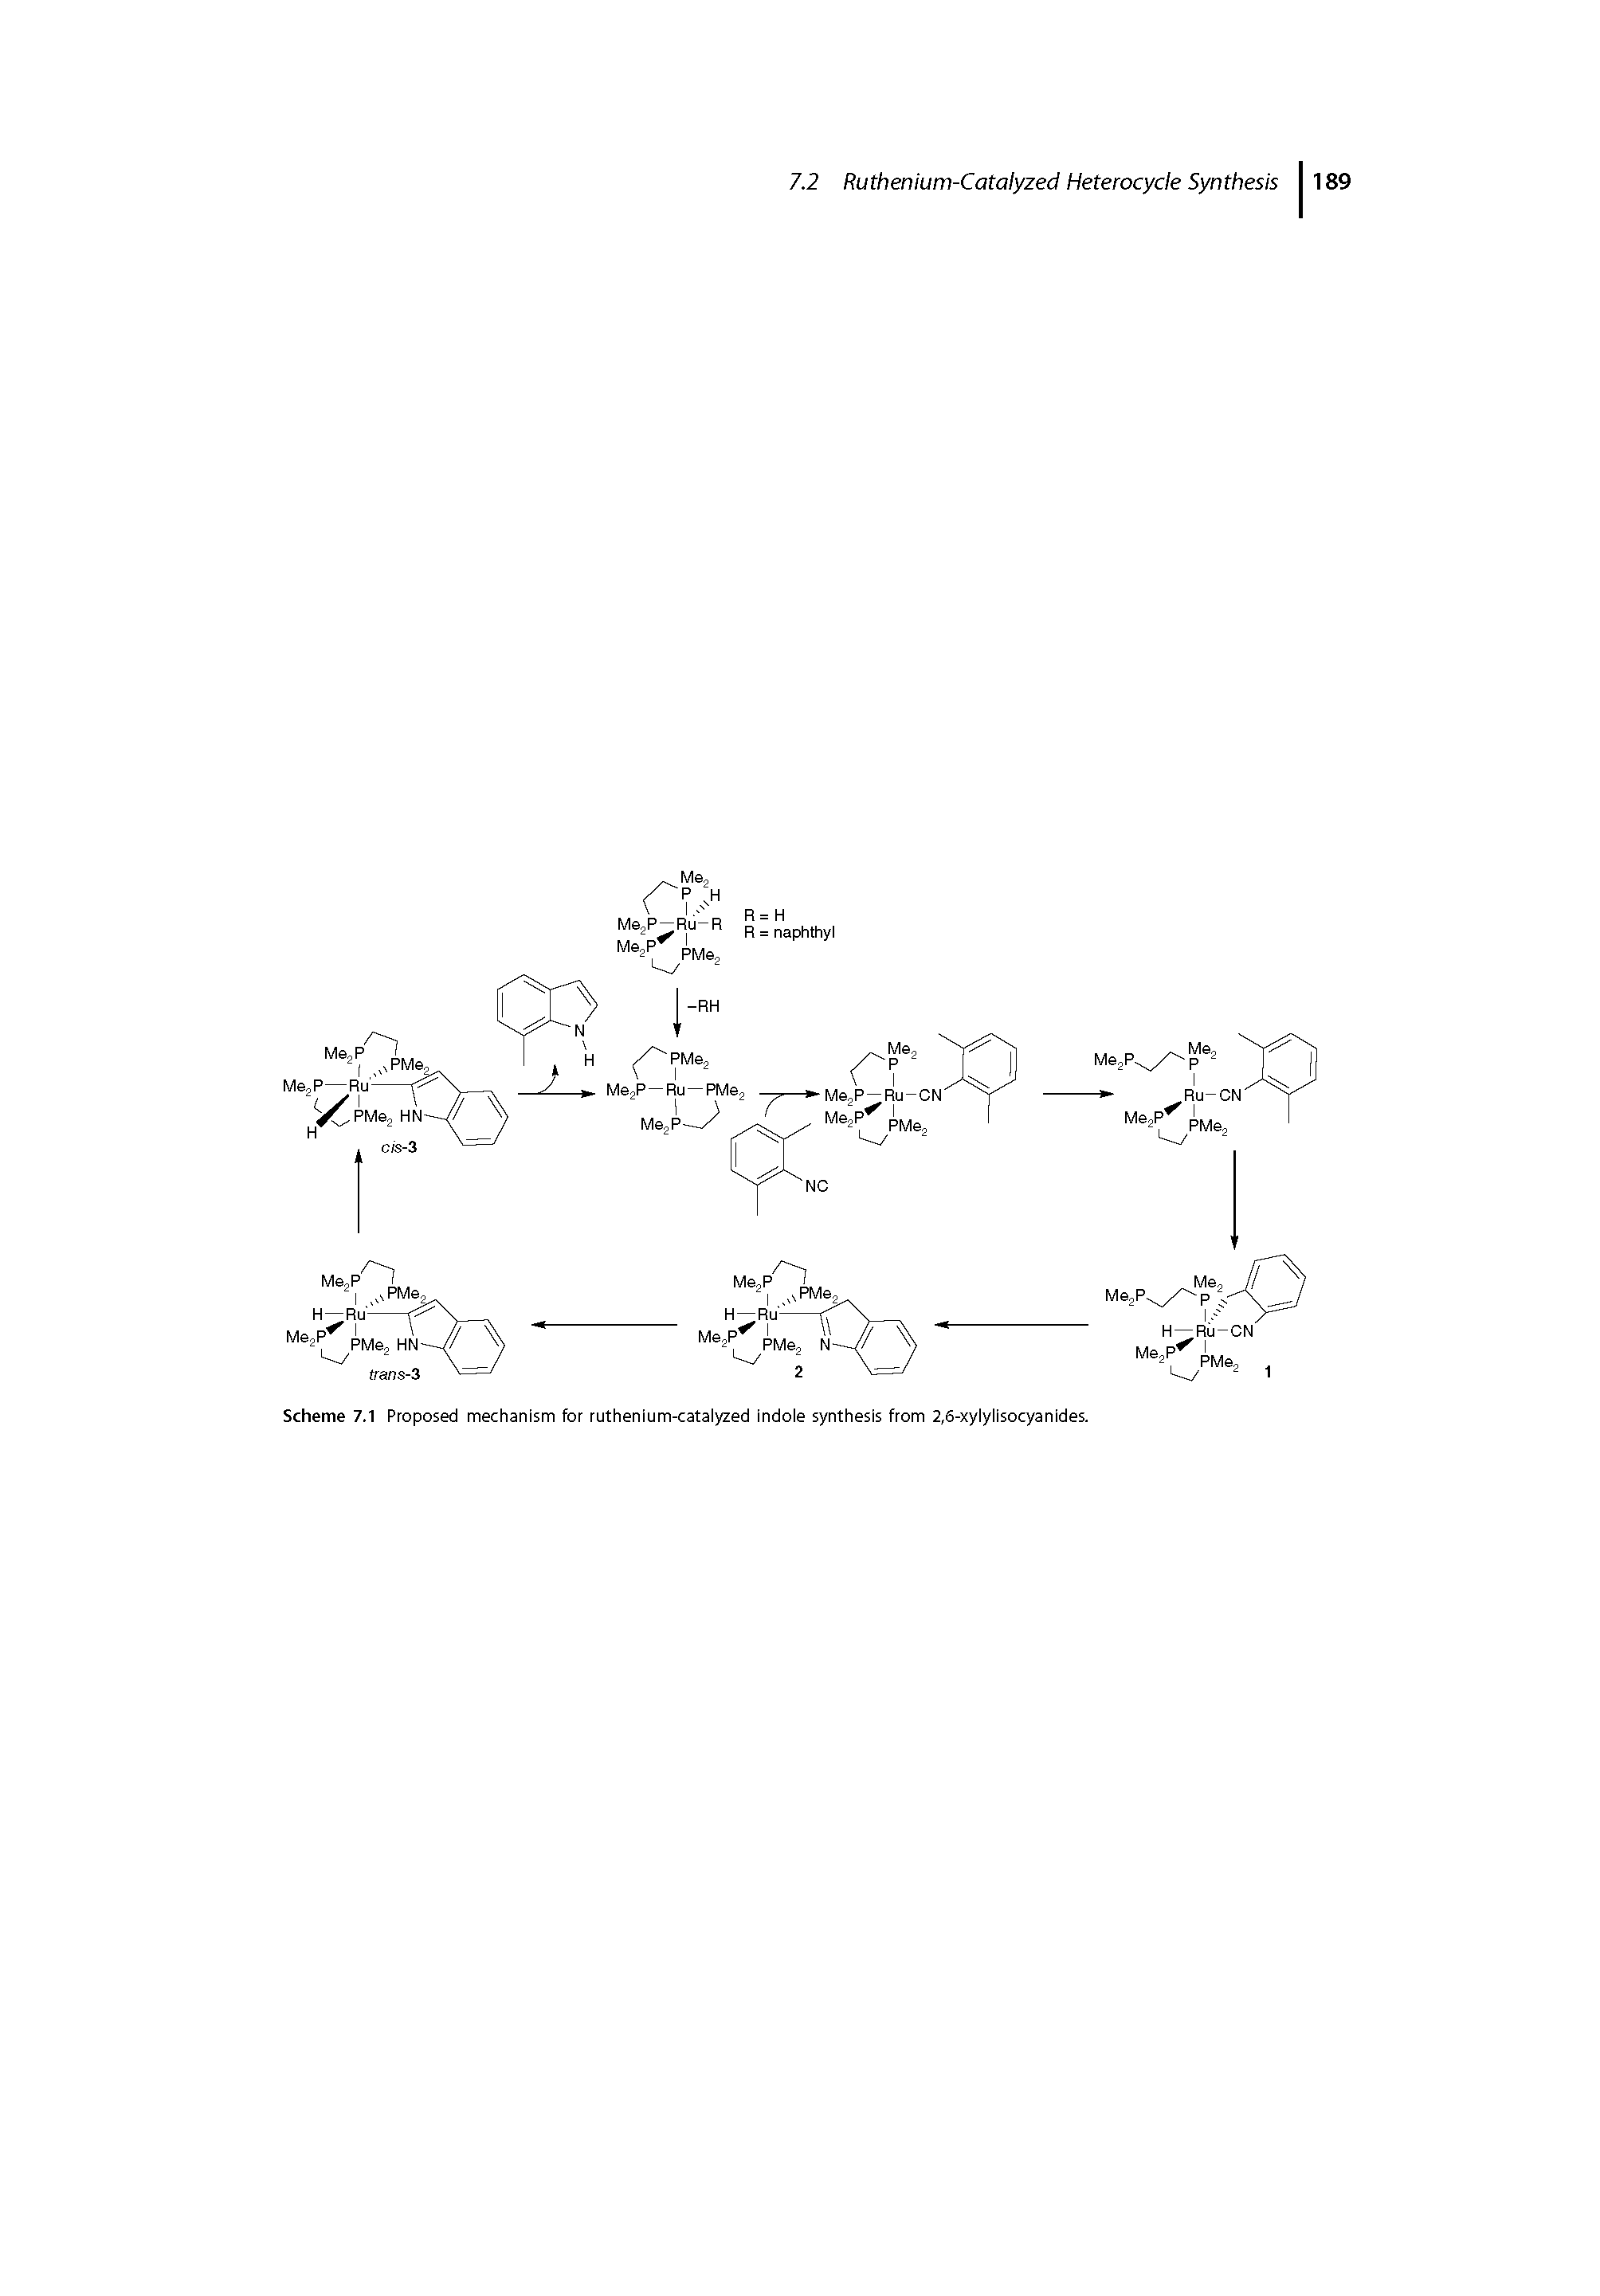 Scheme 7.1 Proposed mechanism for ruthenium-catalyzed indole synthesis from 2,6-xylylisocyanides.